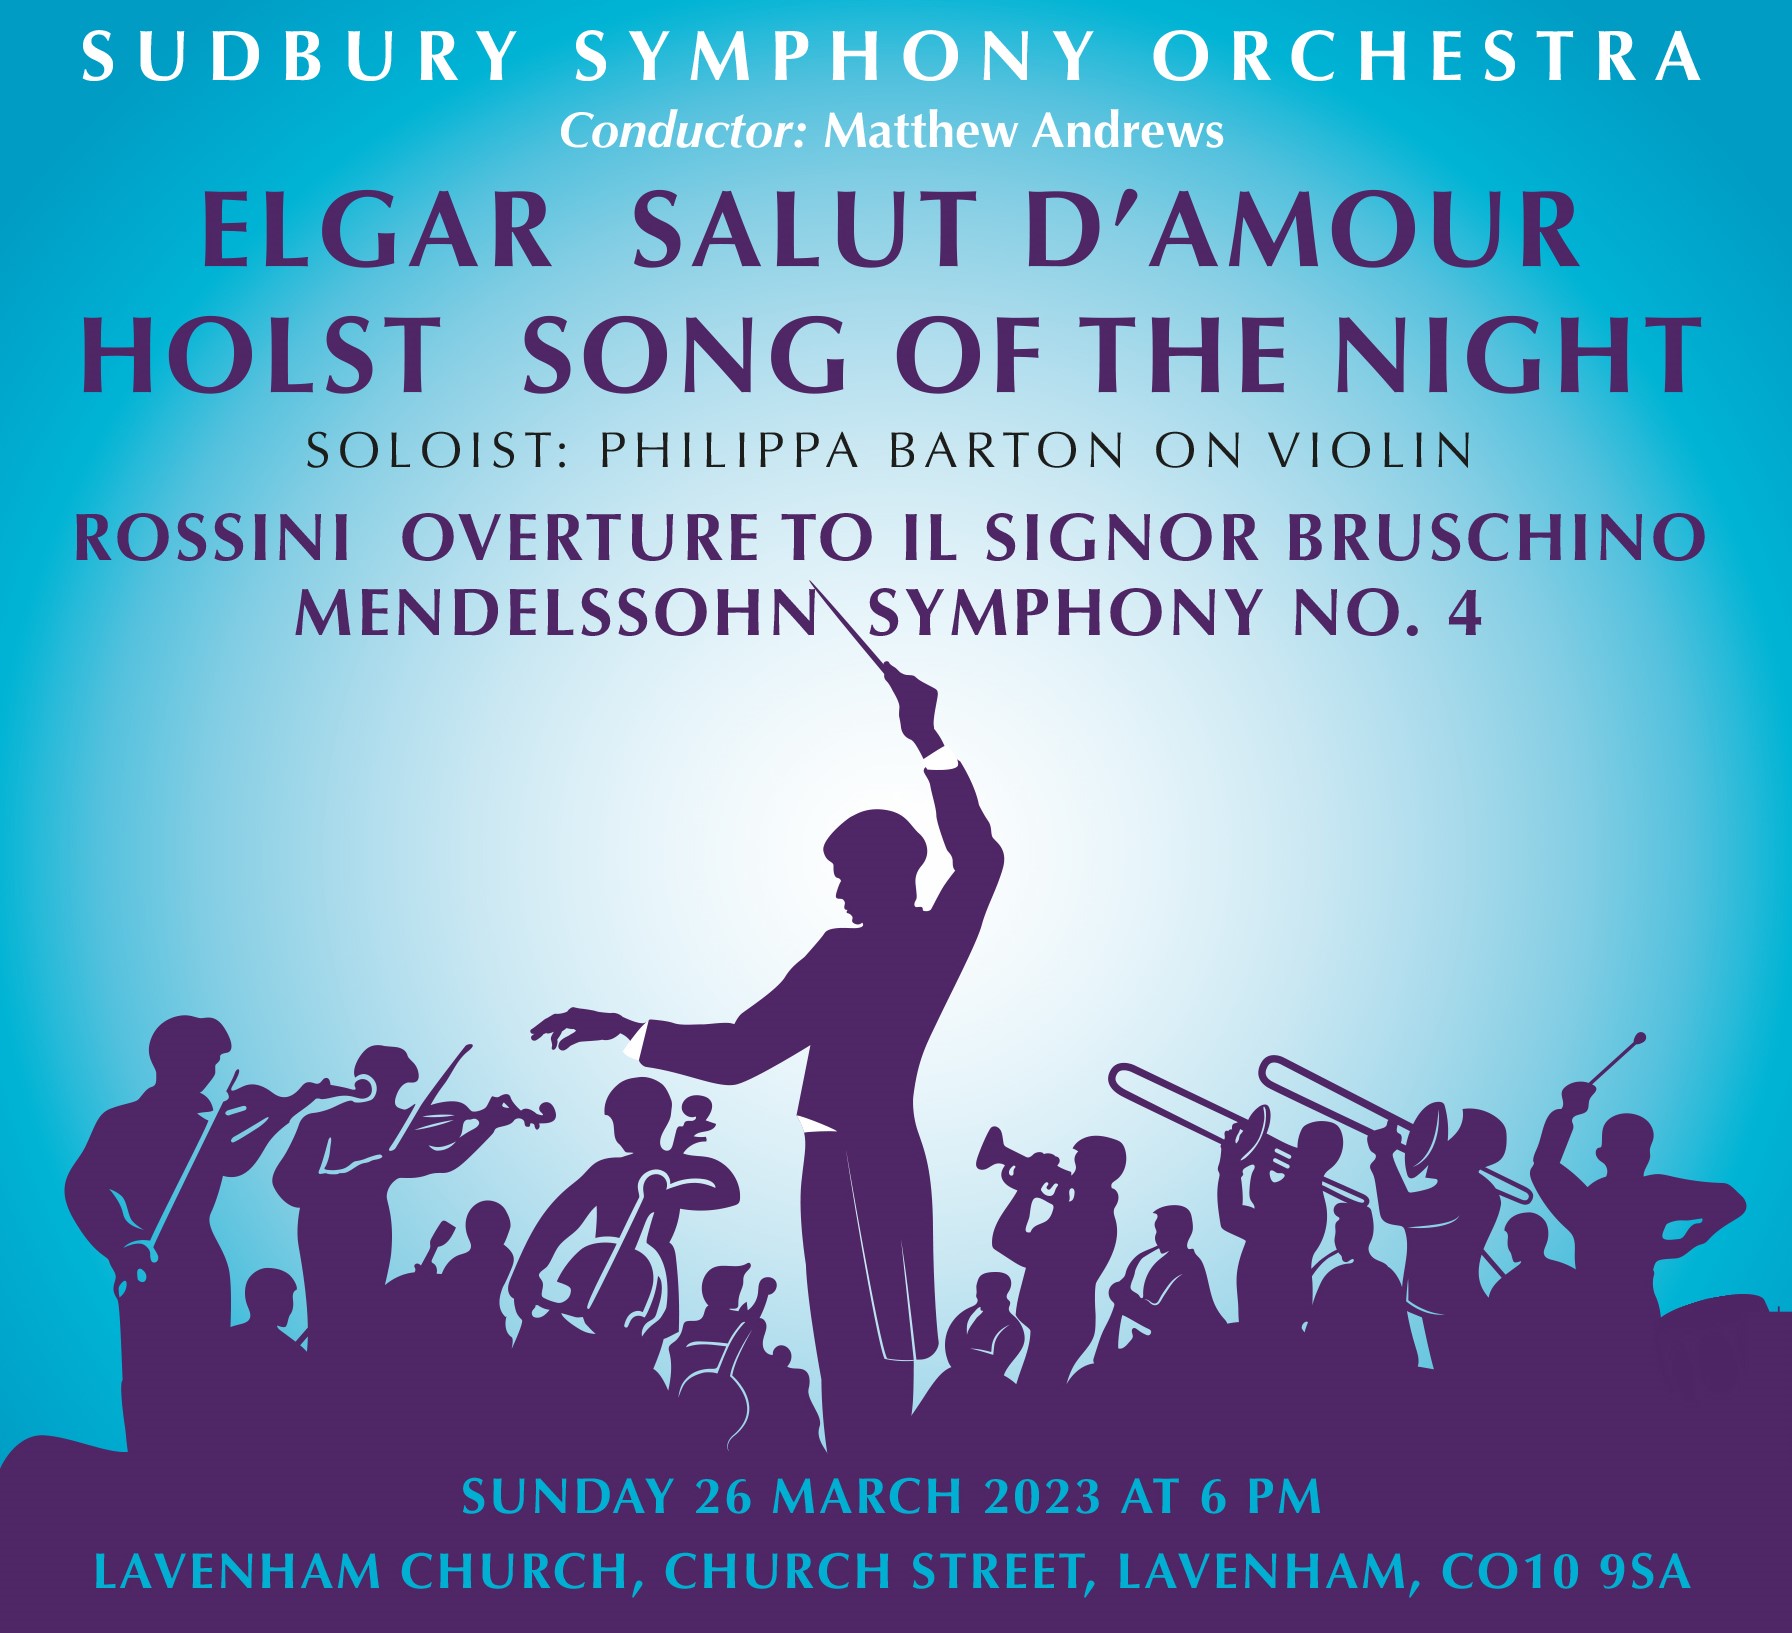 Concert in Lavenham Church on Sunday March 26 at 6 pm